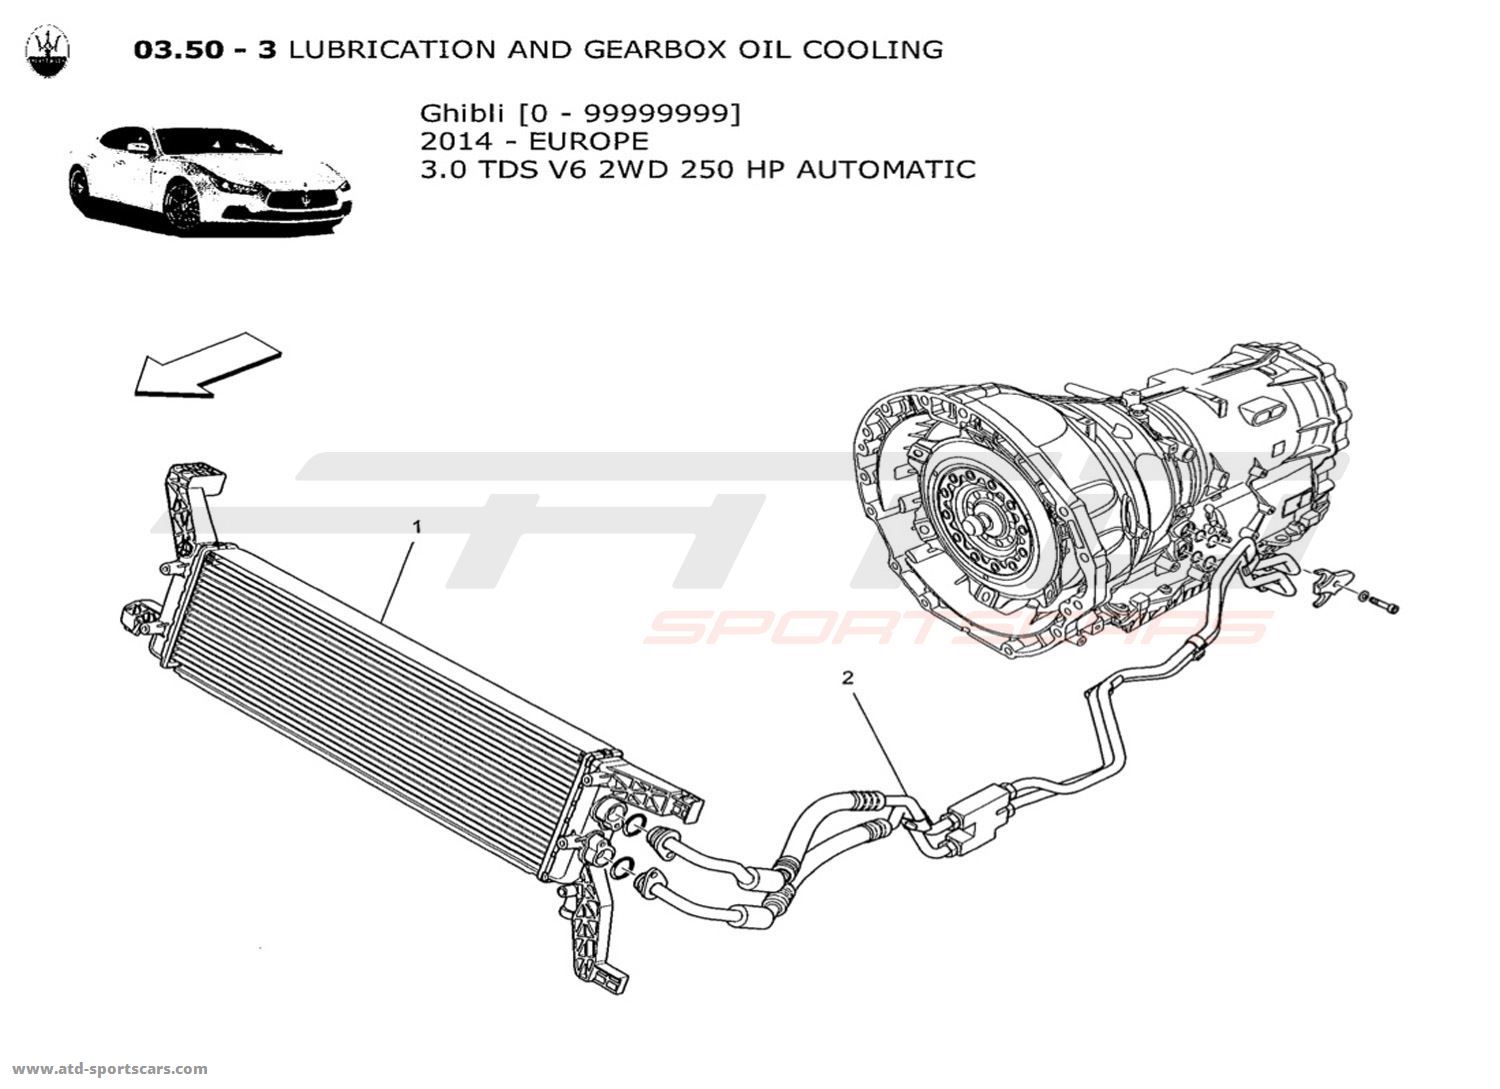 LUBRICATION AND GEARBOX OIL COOLING